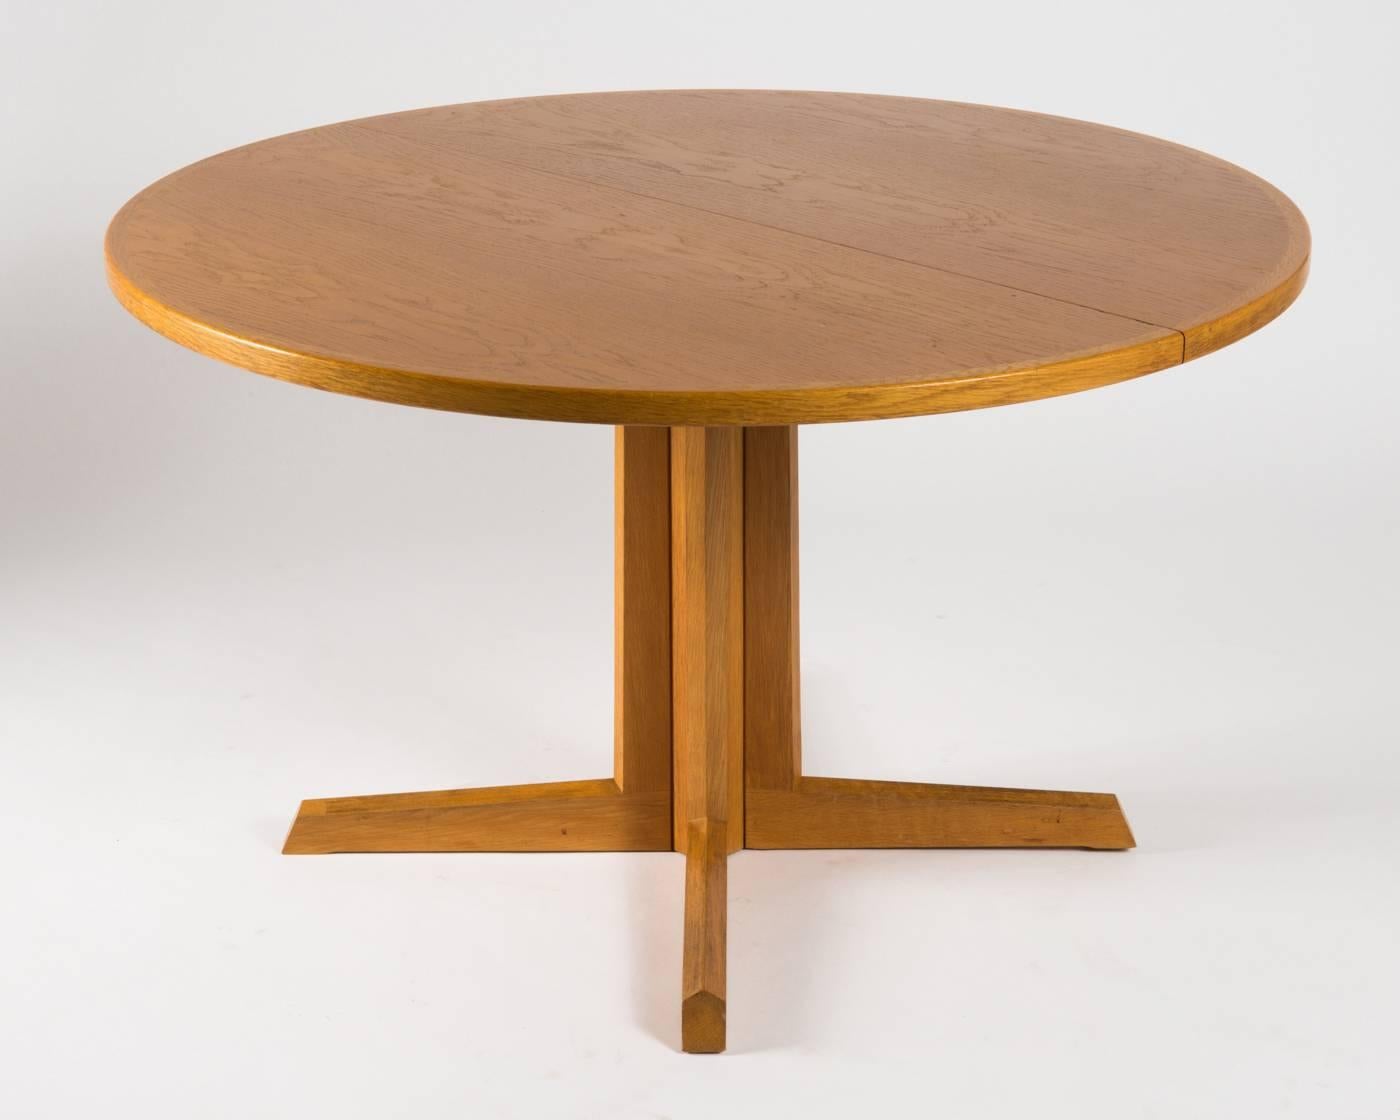 Beautiful round pedestal dining table made in oak designed by N.O. Moller for Gudme Møbelfabrik in the 1960s. Very clean and sharp design with the organic feel that N.O. Moller is known for. The table is extendable with a center leaf and expands